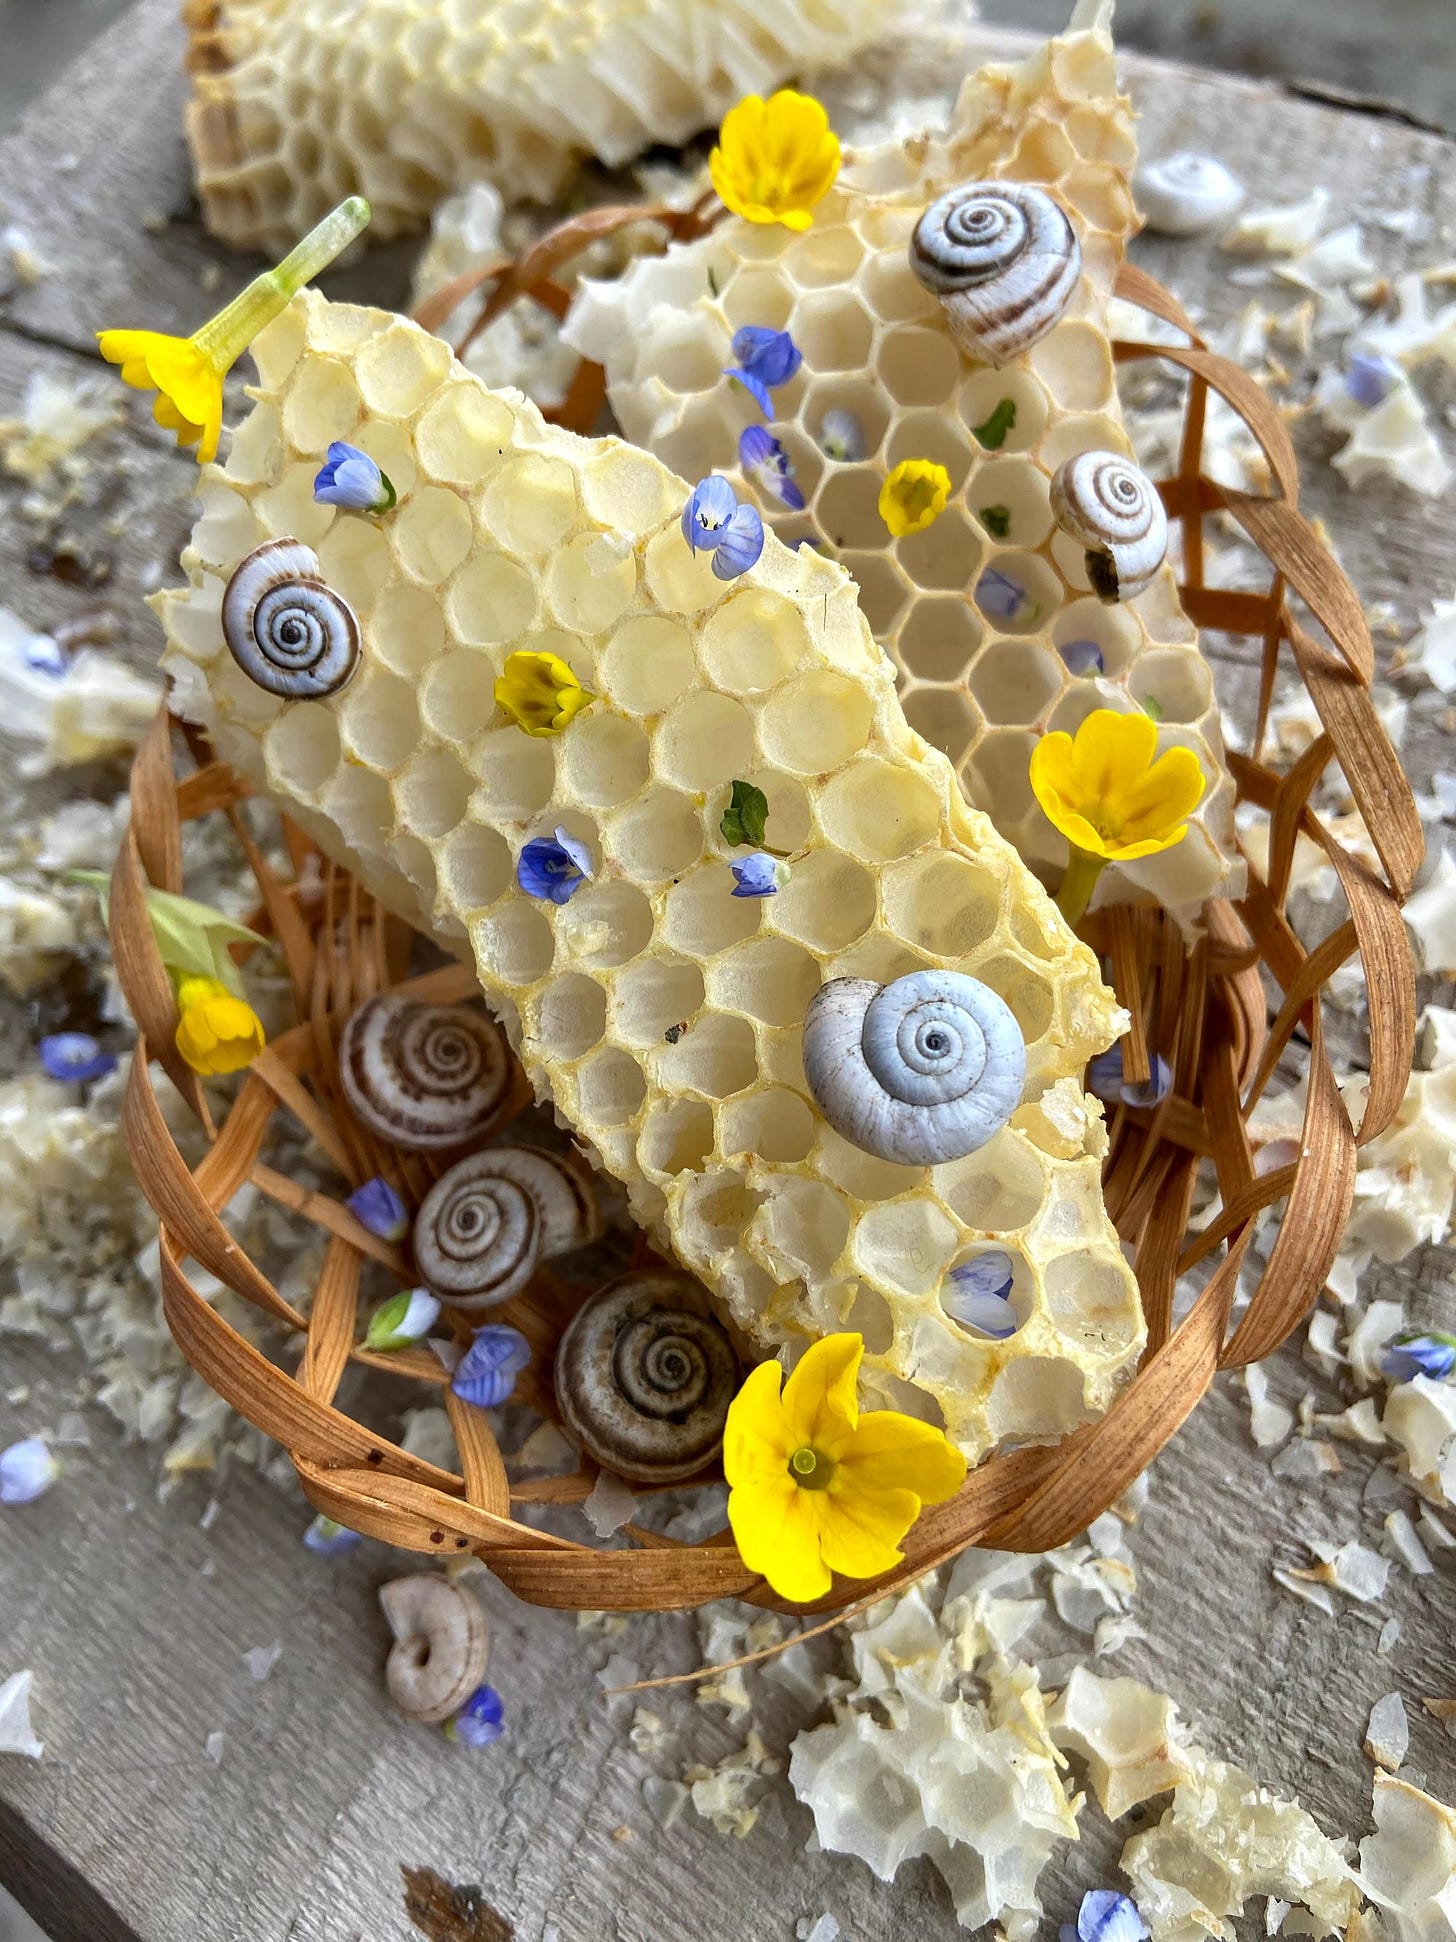 image of seashells and flowers atop beeswax in a basket